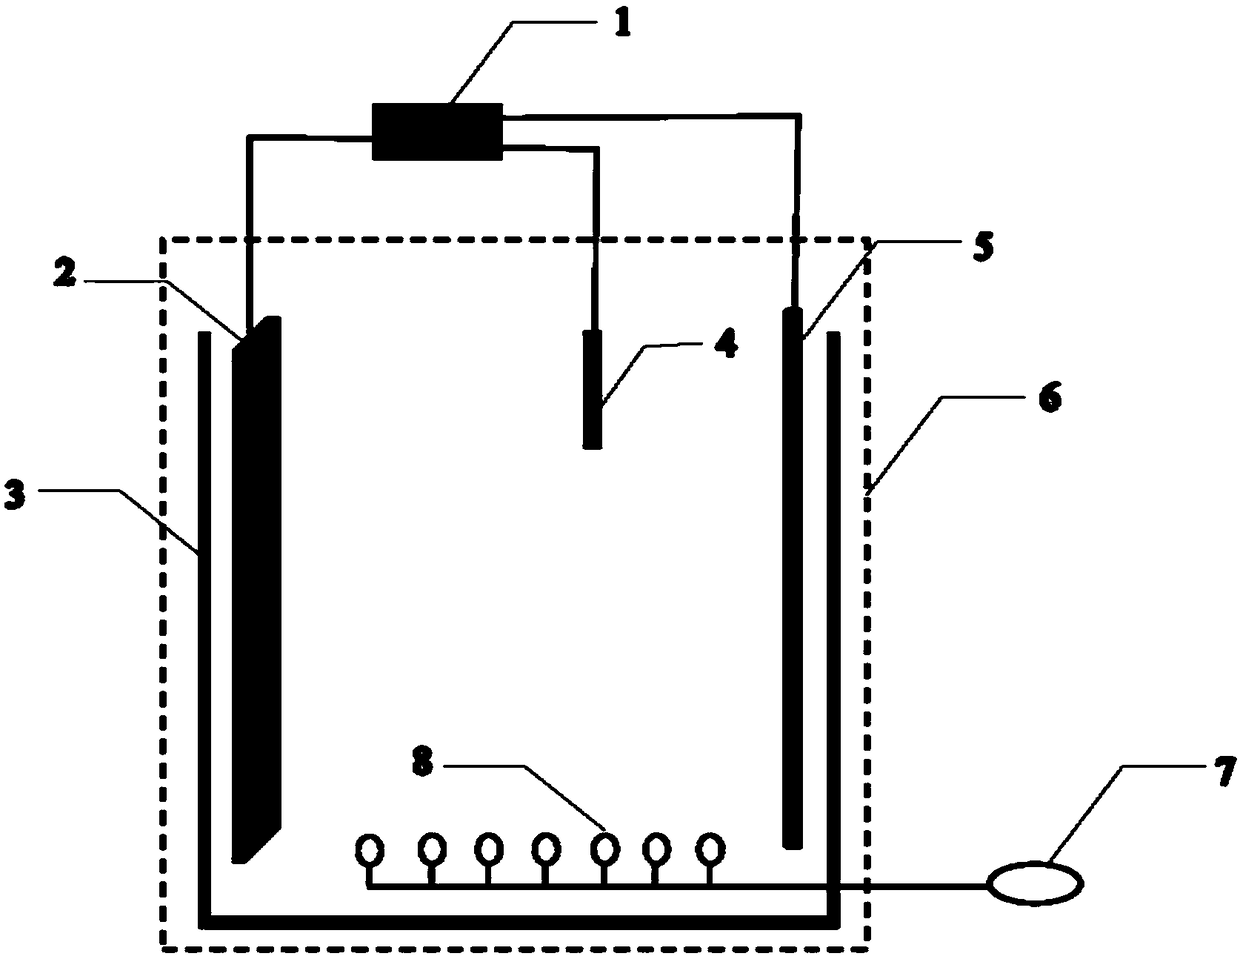 Apparatus and method for electrochemically assisting aerobic composting of organic solid waste